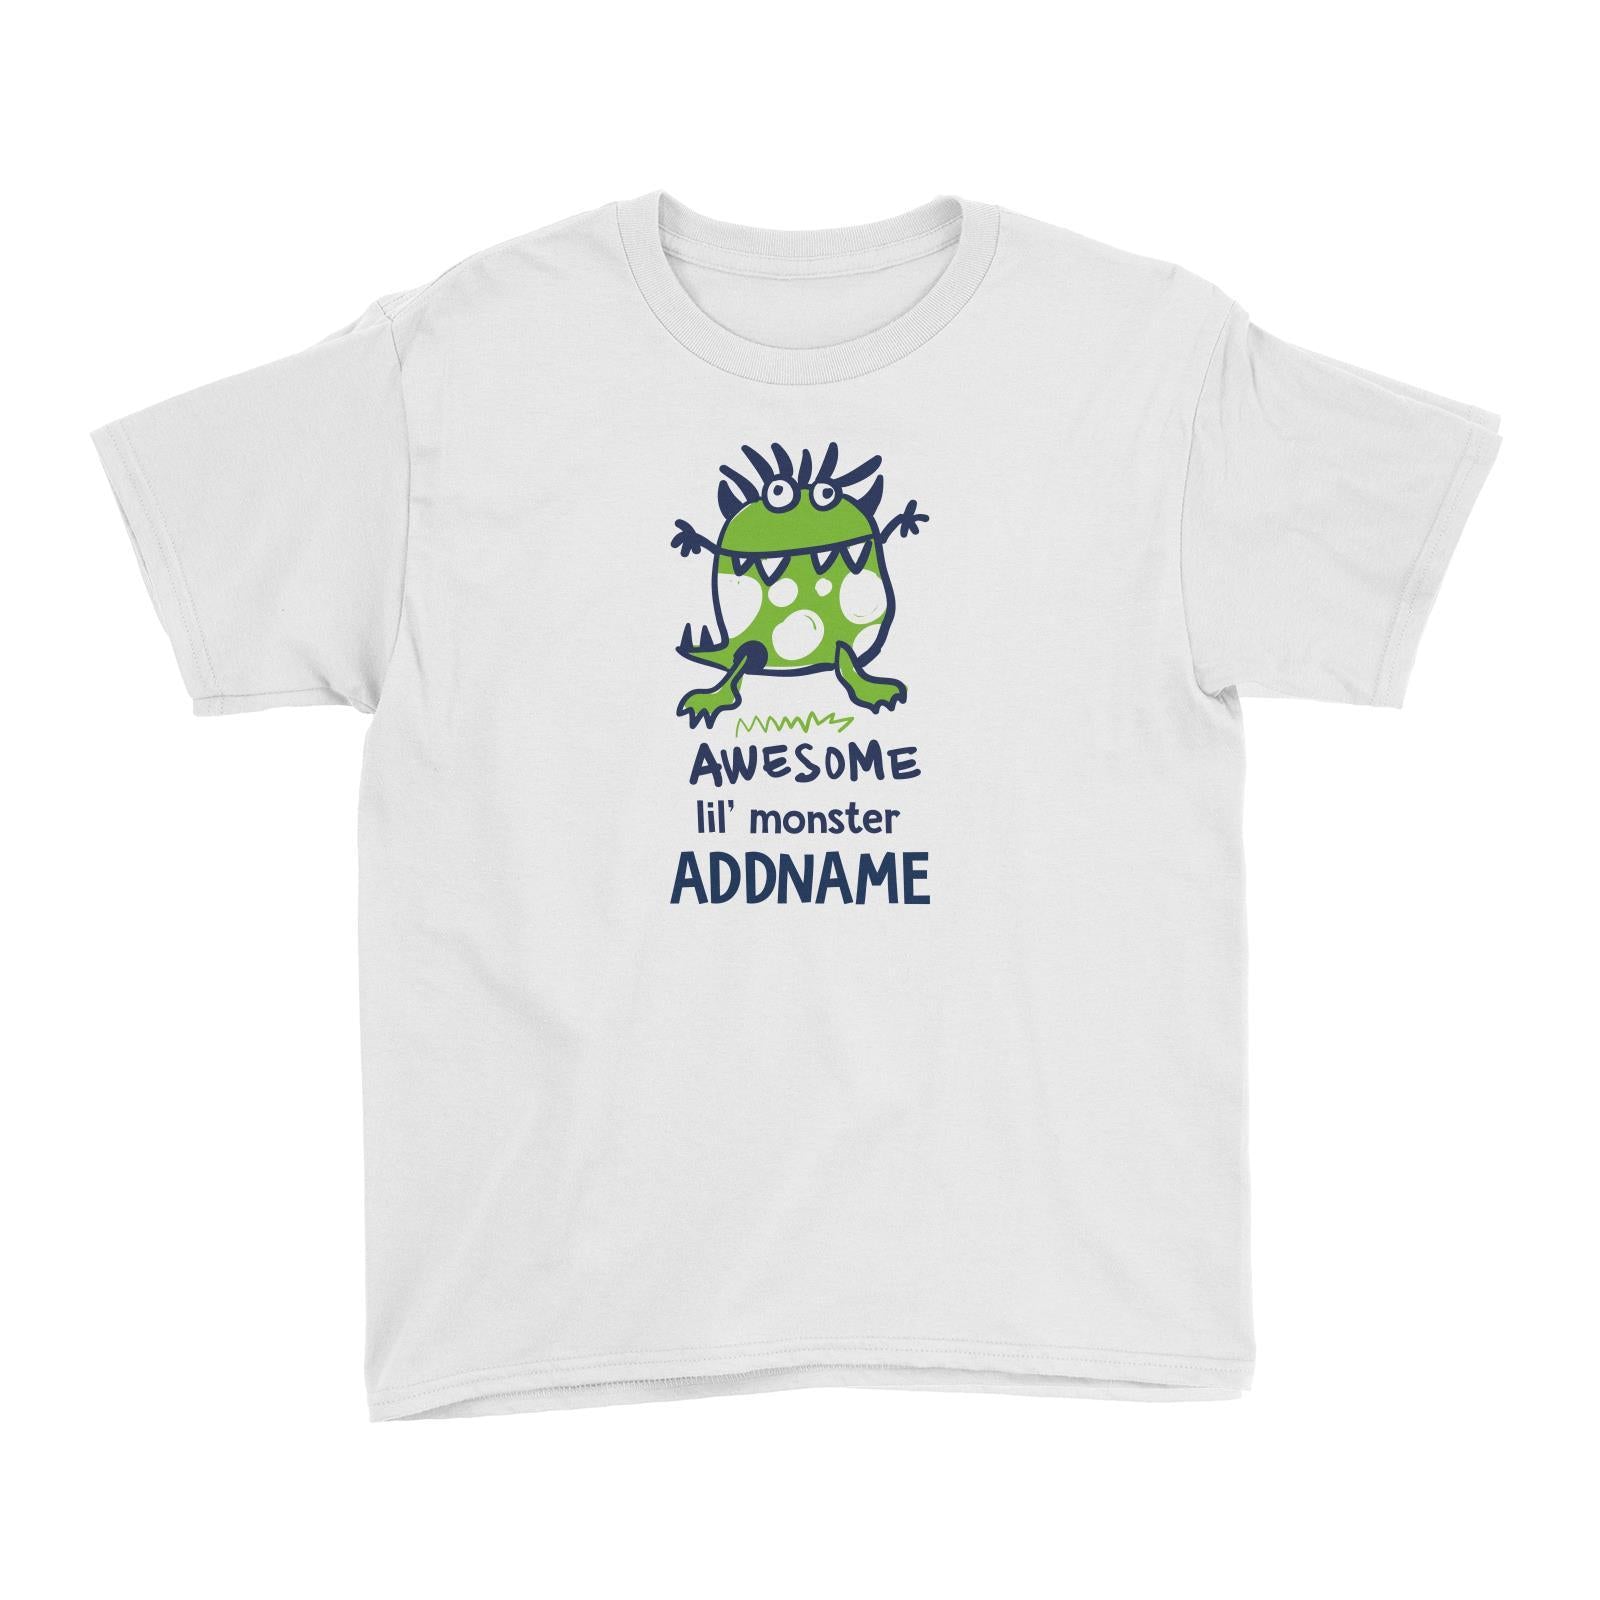 Cool Vibrant Series Awesome Lil' Monster Addname Kid's T-Shirt